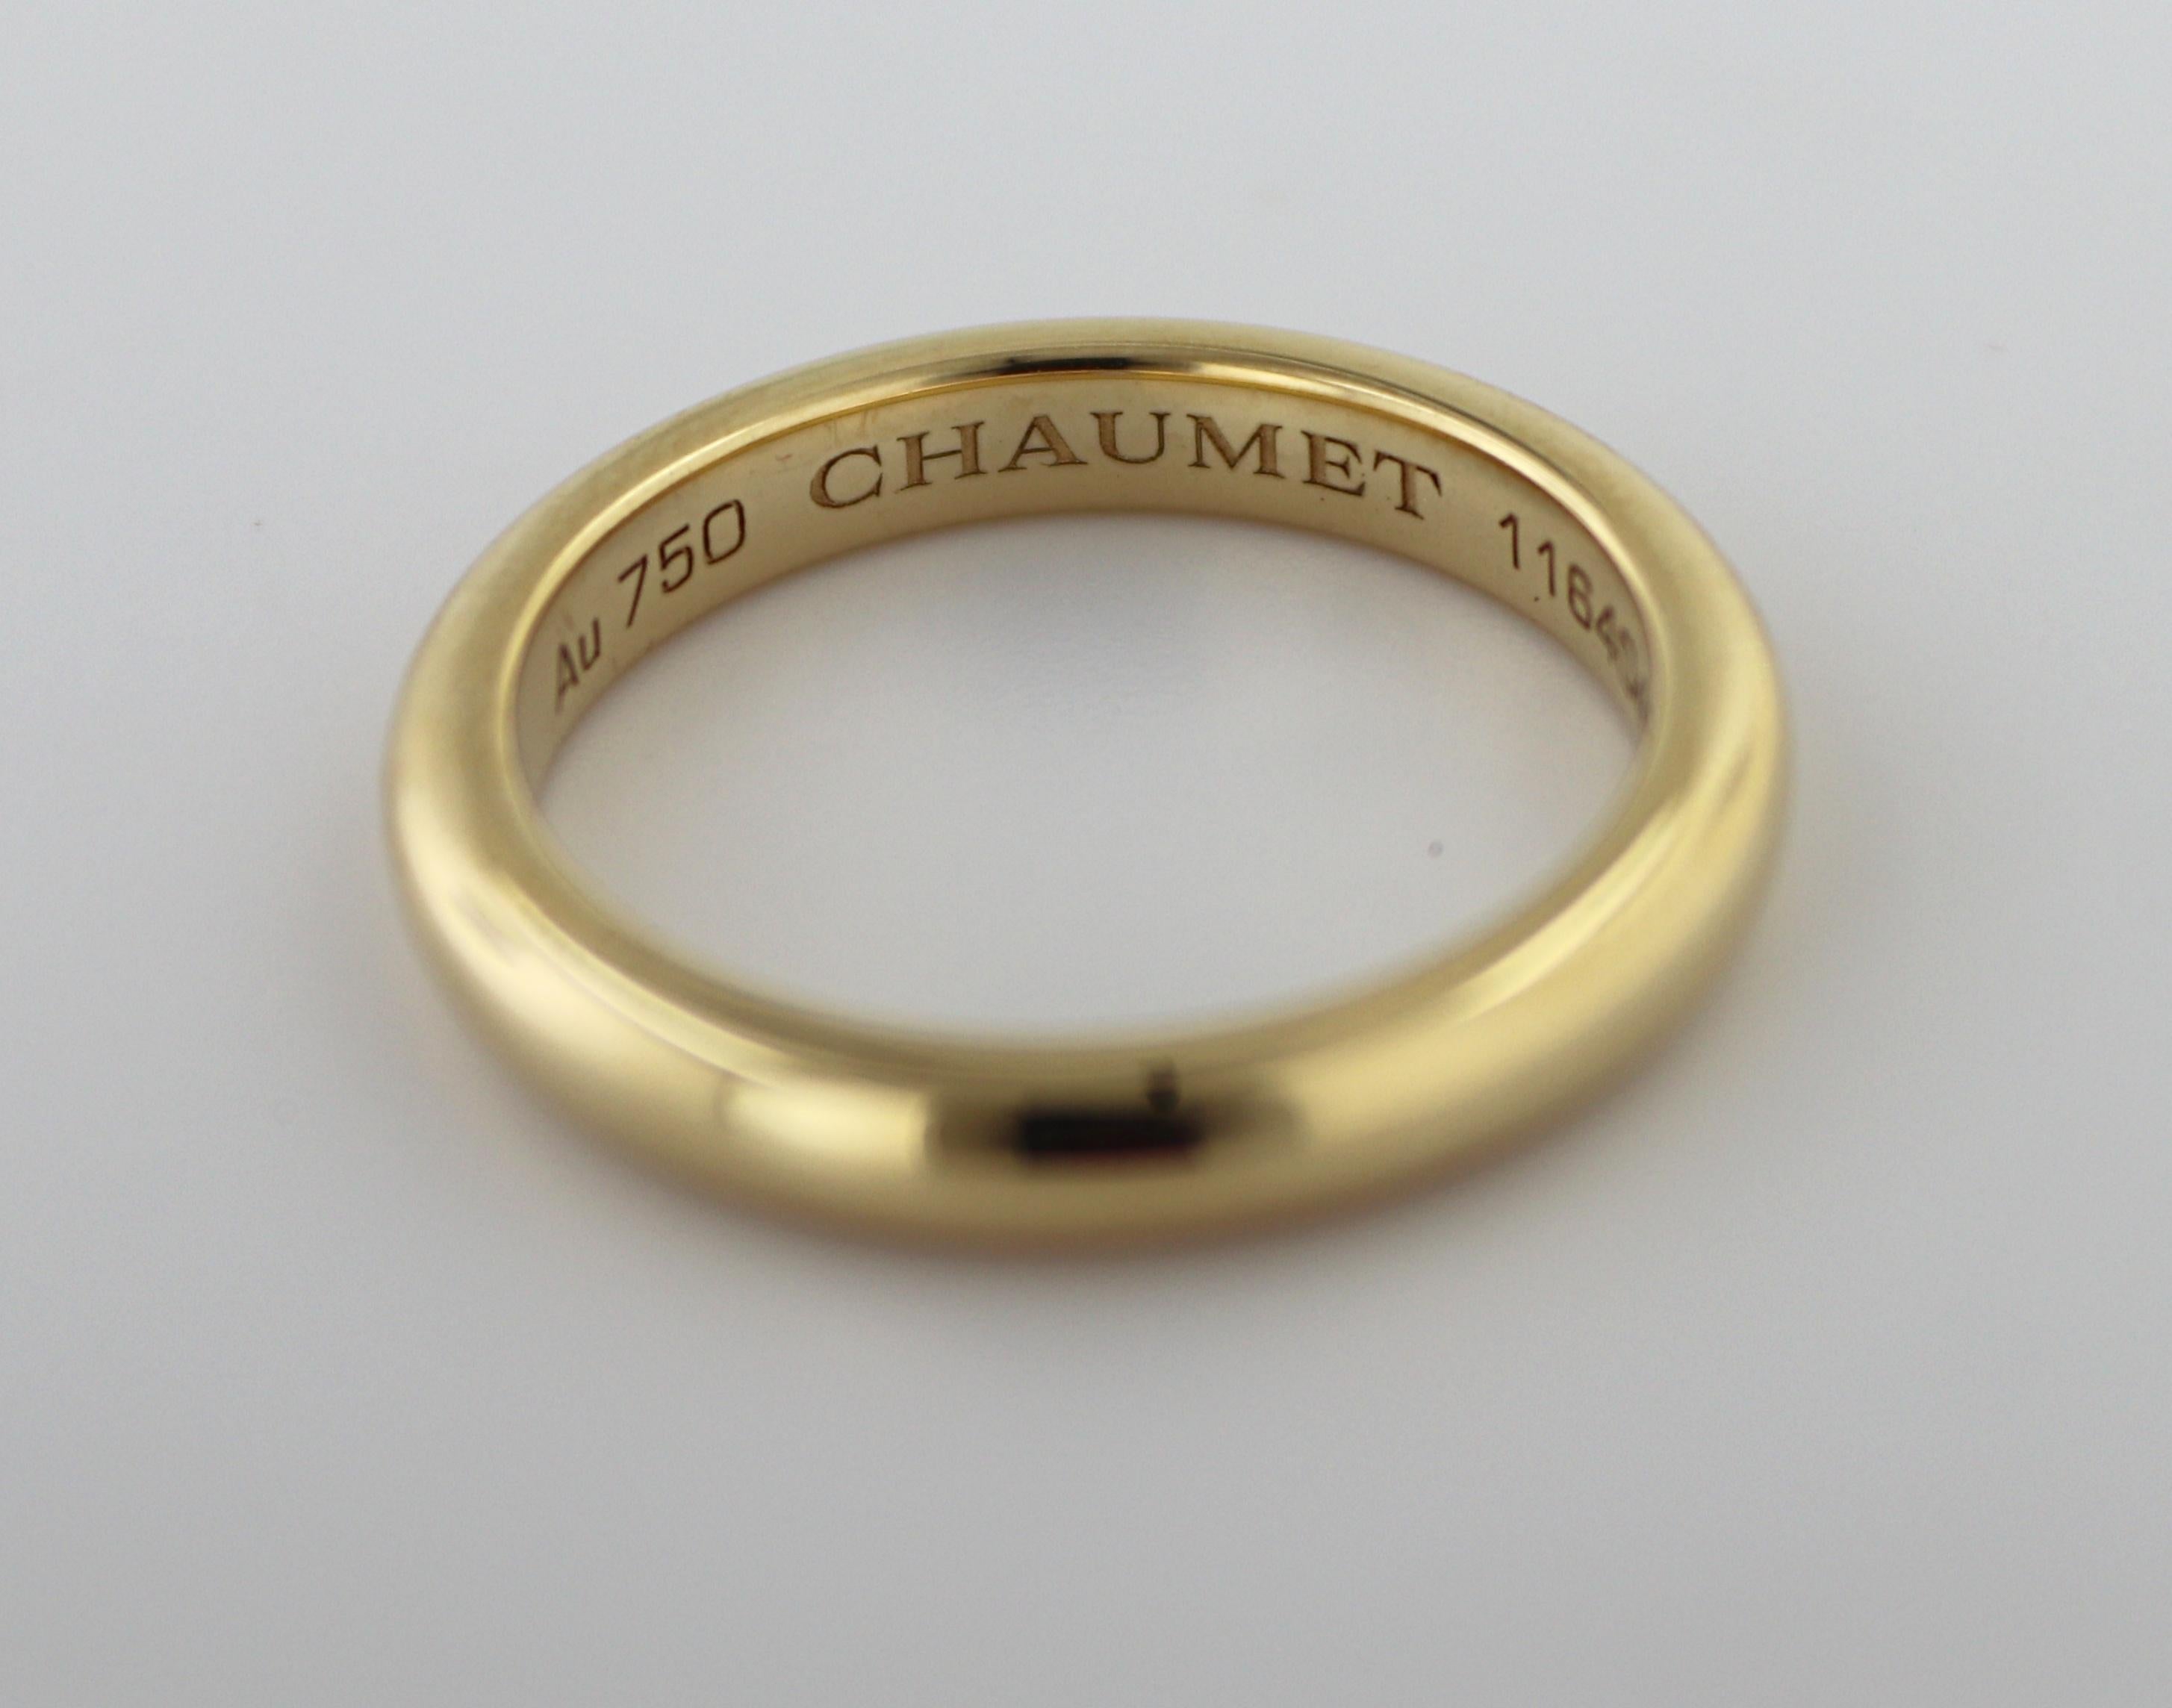 The 2.8 mm, 18k yellow gold half round band, size 5.75, Weight 4.73 grams.